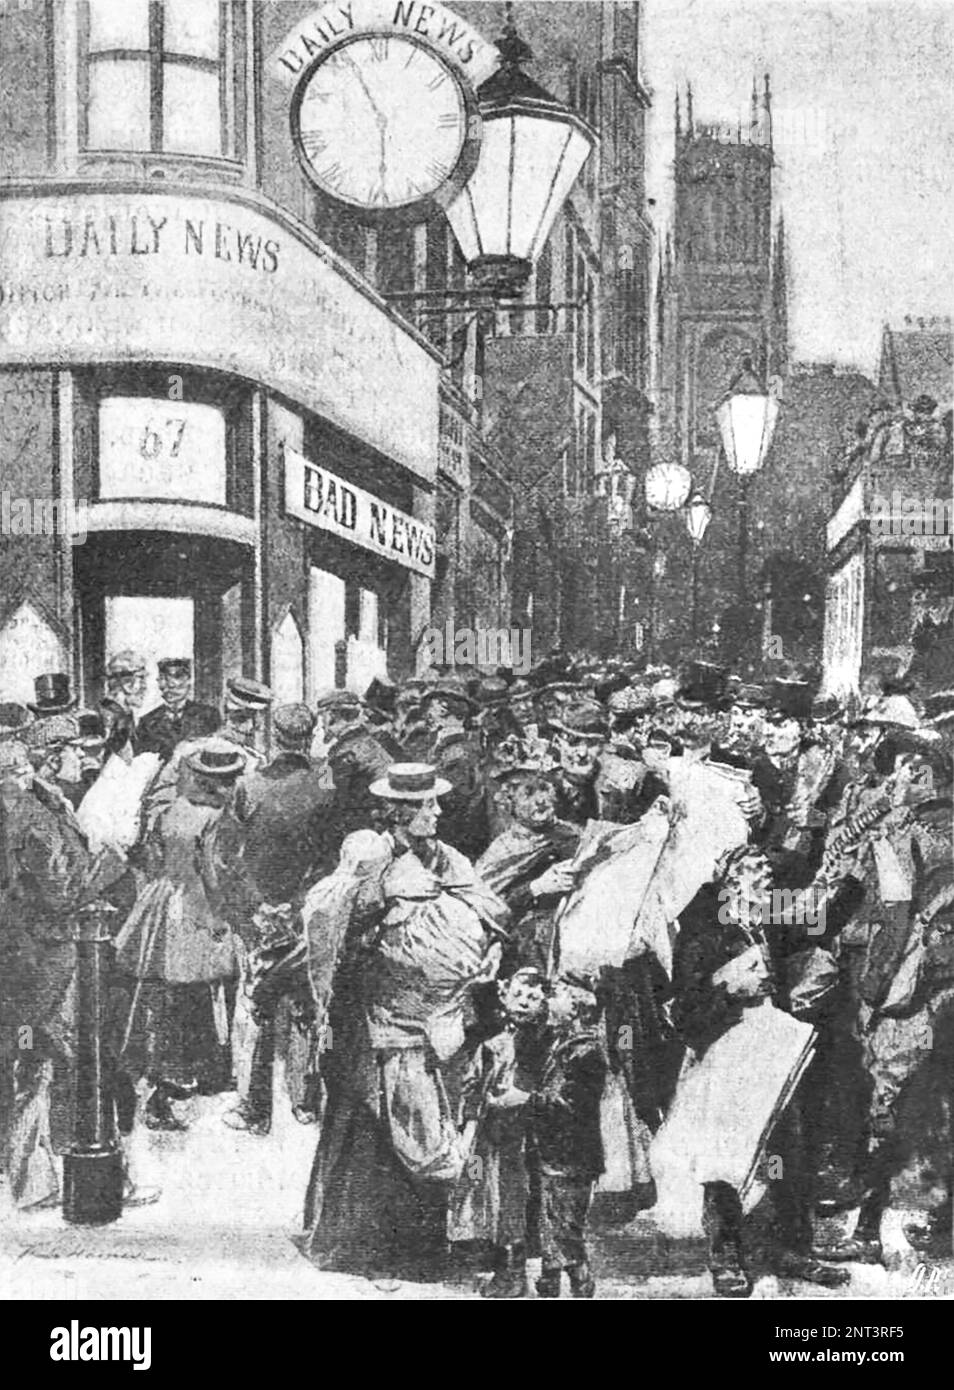 A crowd of people on the streets of London in front of the 'Daily News', which first issued a telegram about the victory of the Boers and the capture of General Methuen. Illustration from 1902. Stock Photo